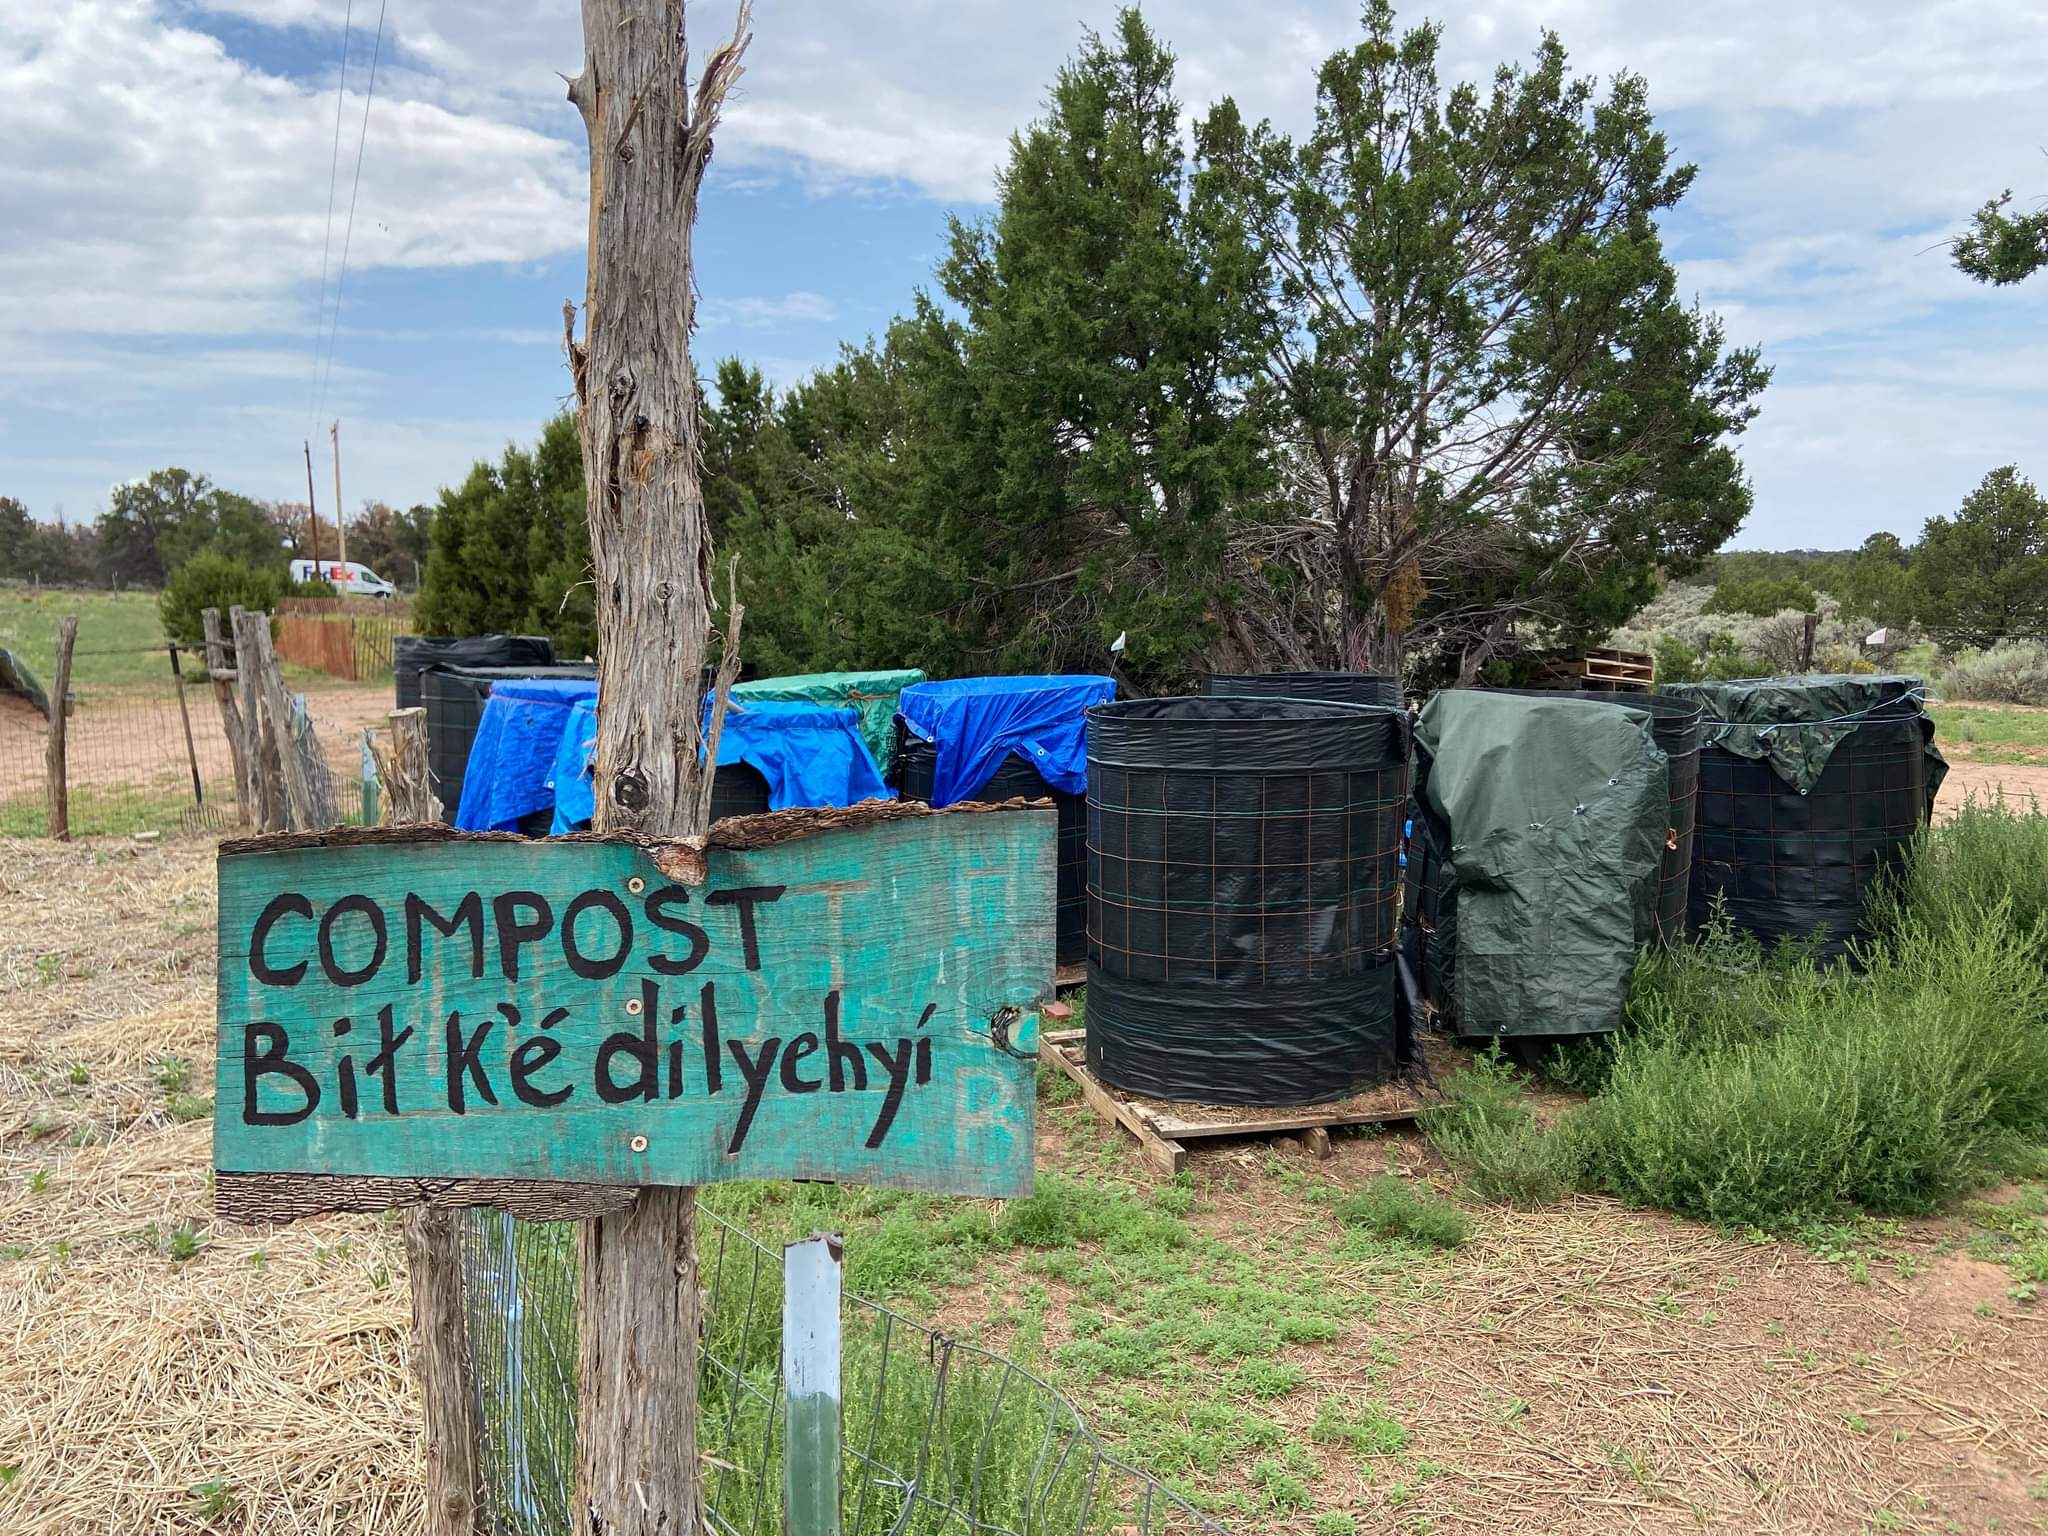 Several compost bins wrapped in cobalt blue, black, and olive green tarps sit below a blue sky with clouds, in front of a smattering of trees. A fence with a green sign reading Compost and Bit k'e'dilychyi is in the foreground.